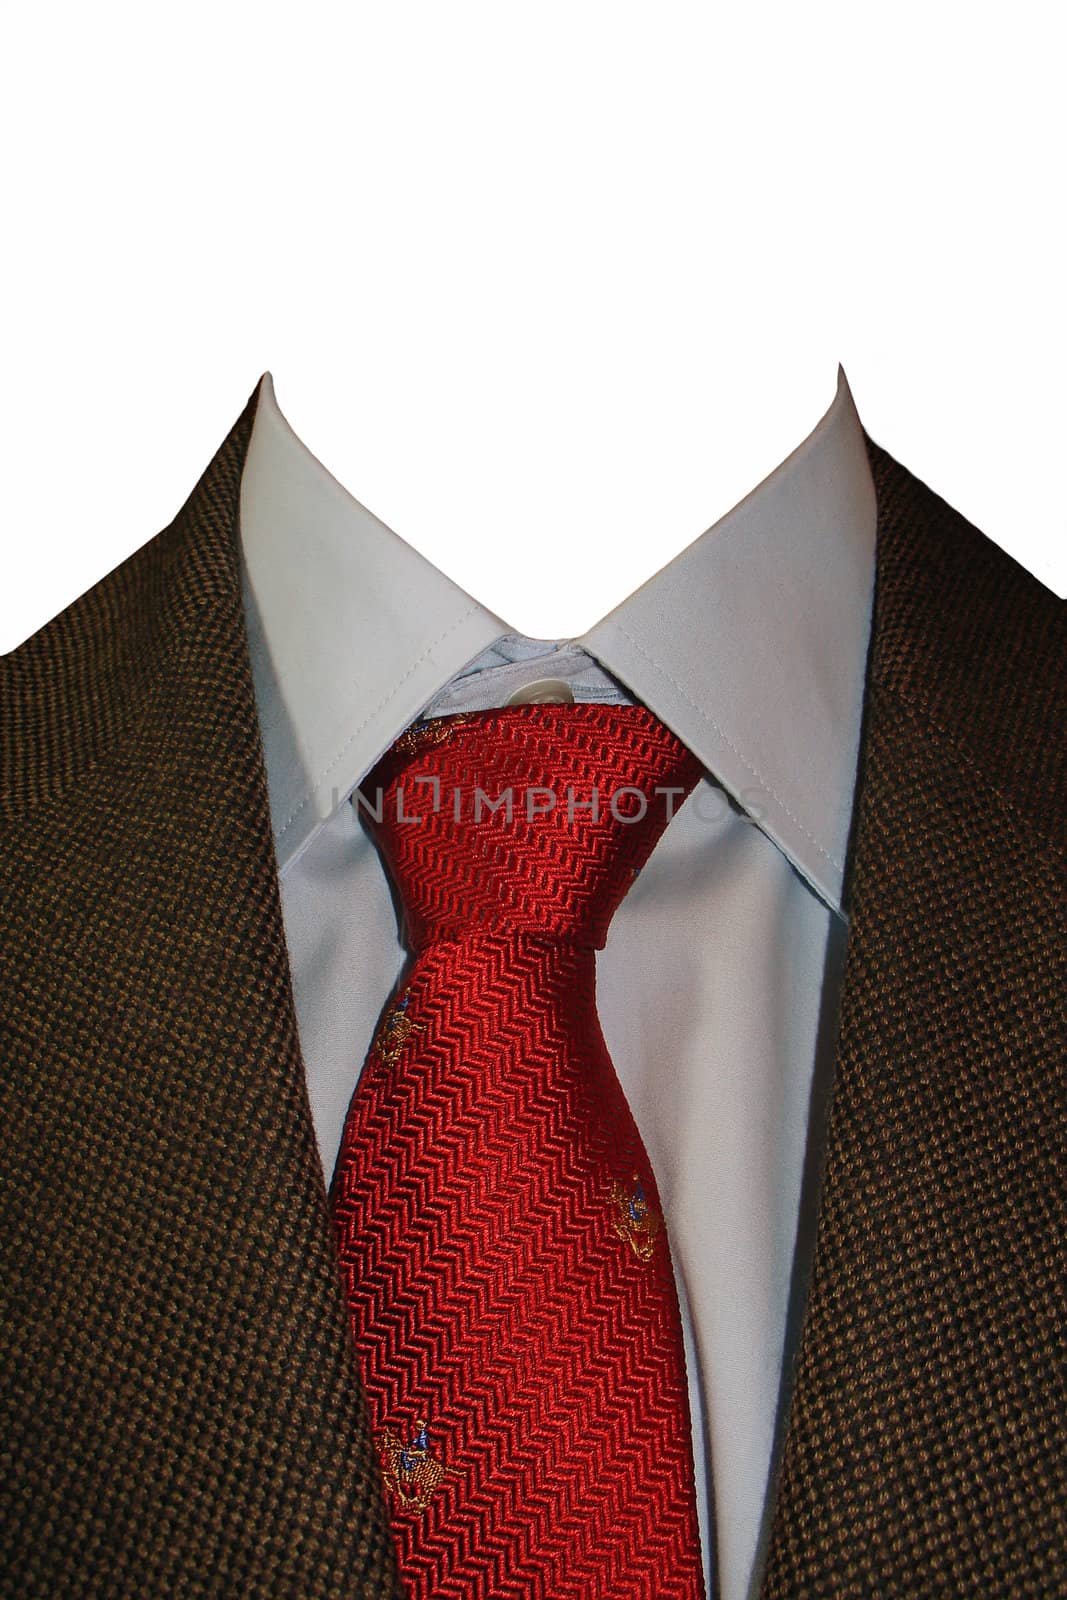 Template consists of Suit, red tie and a shirt           